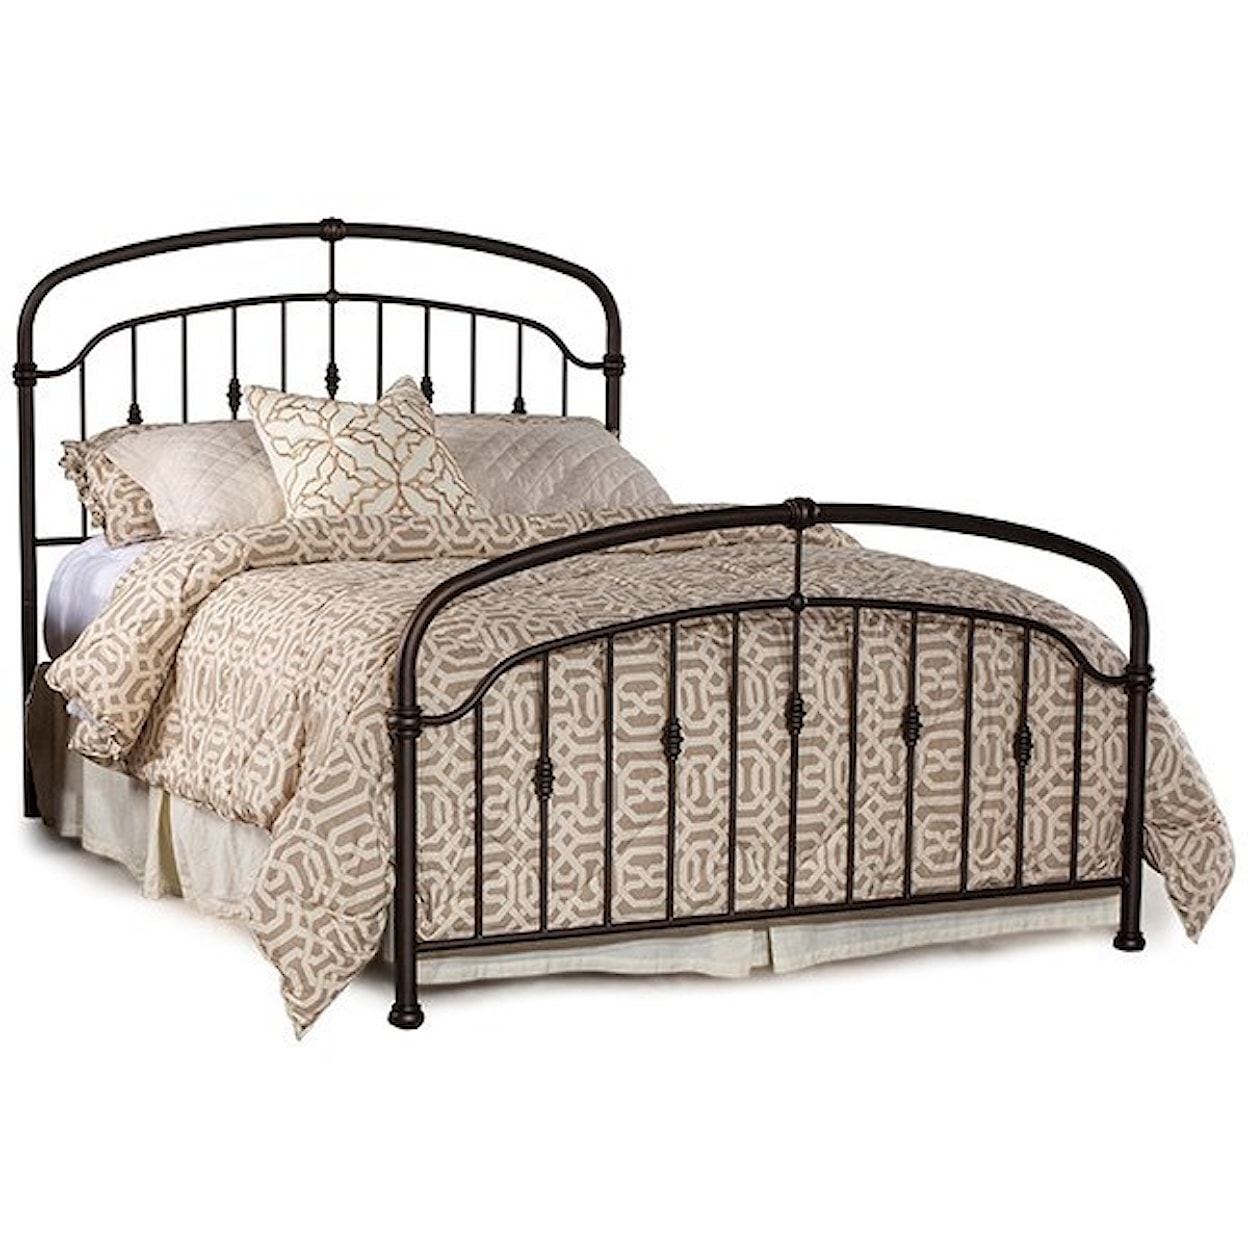 Hillsdale Pearson Metal King Bed